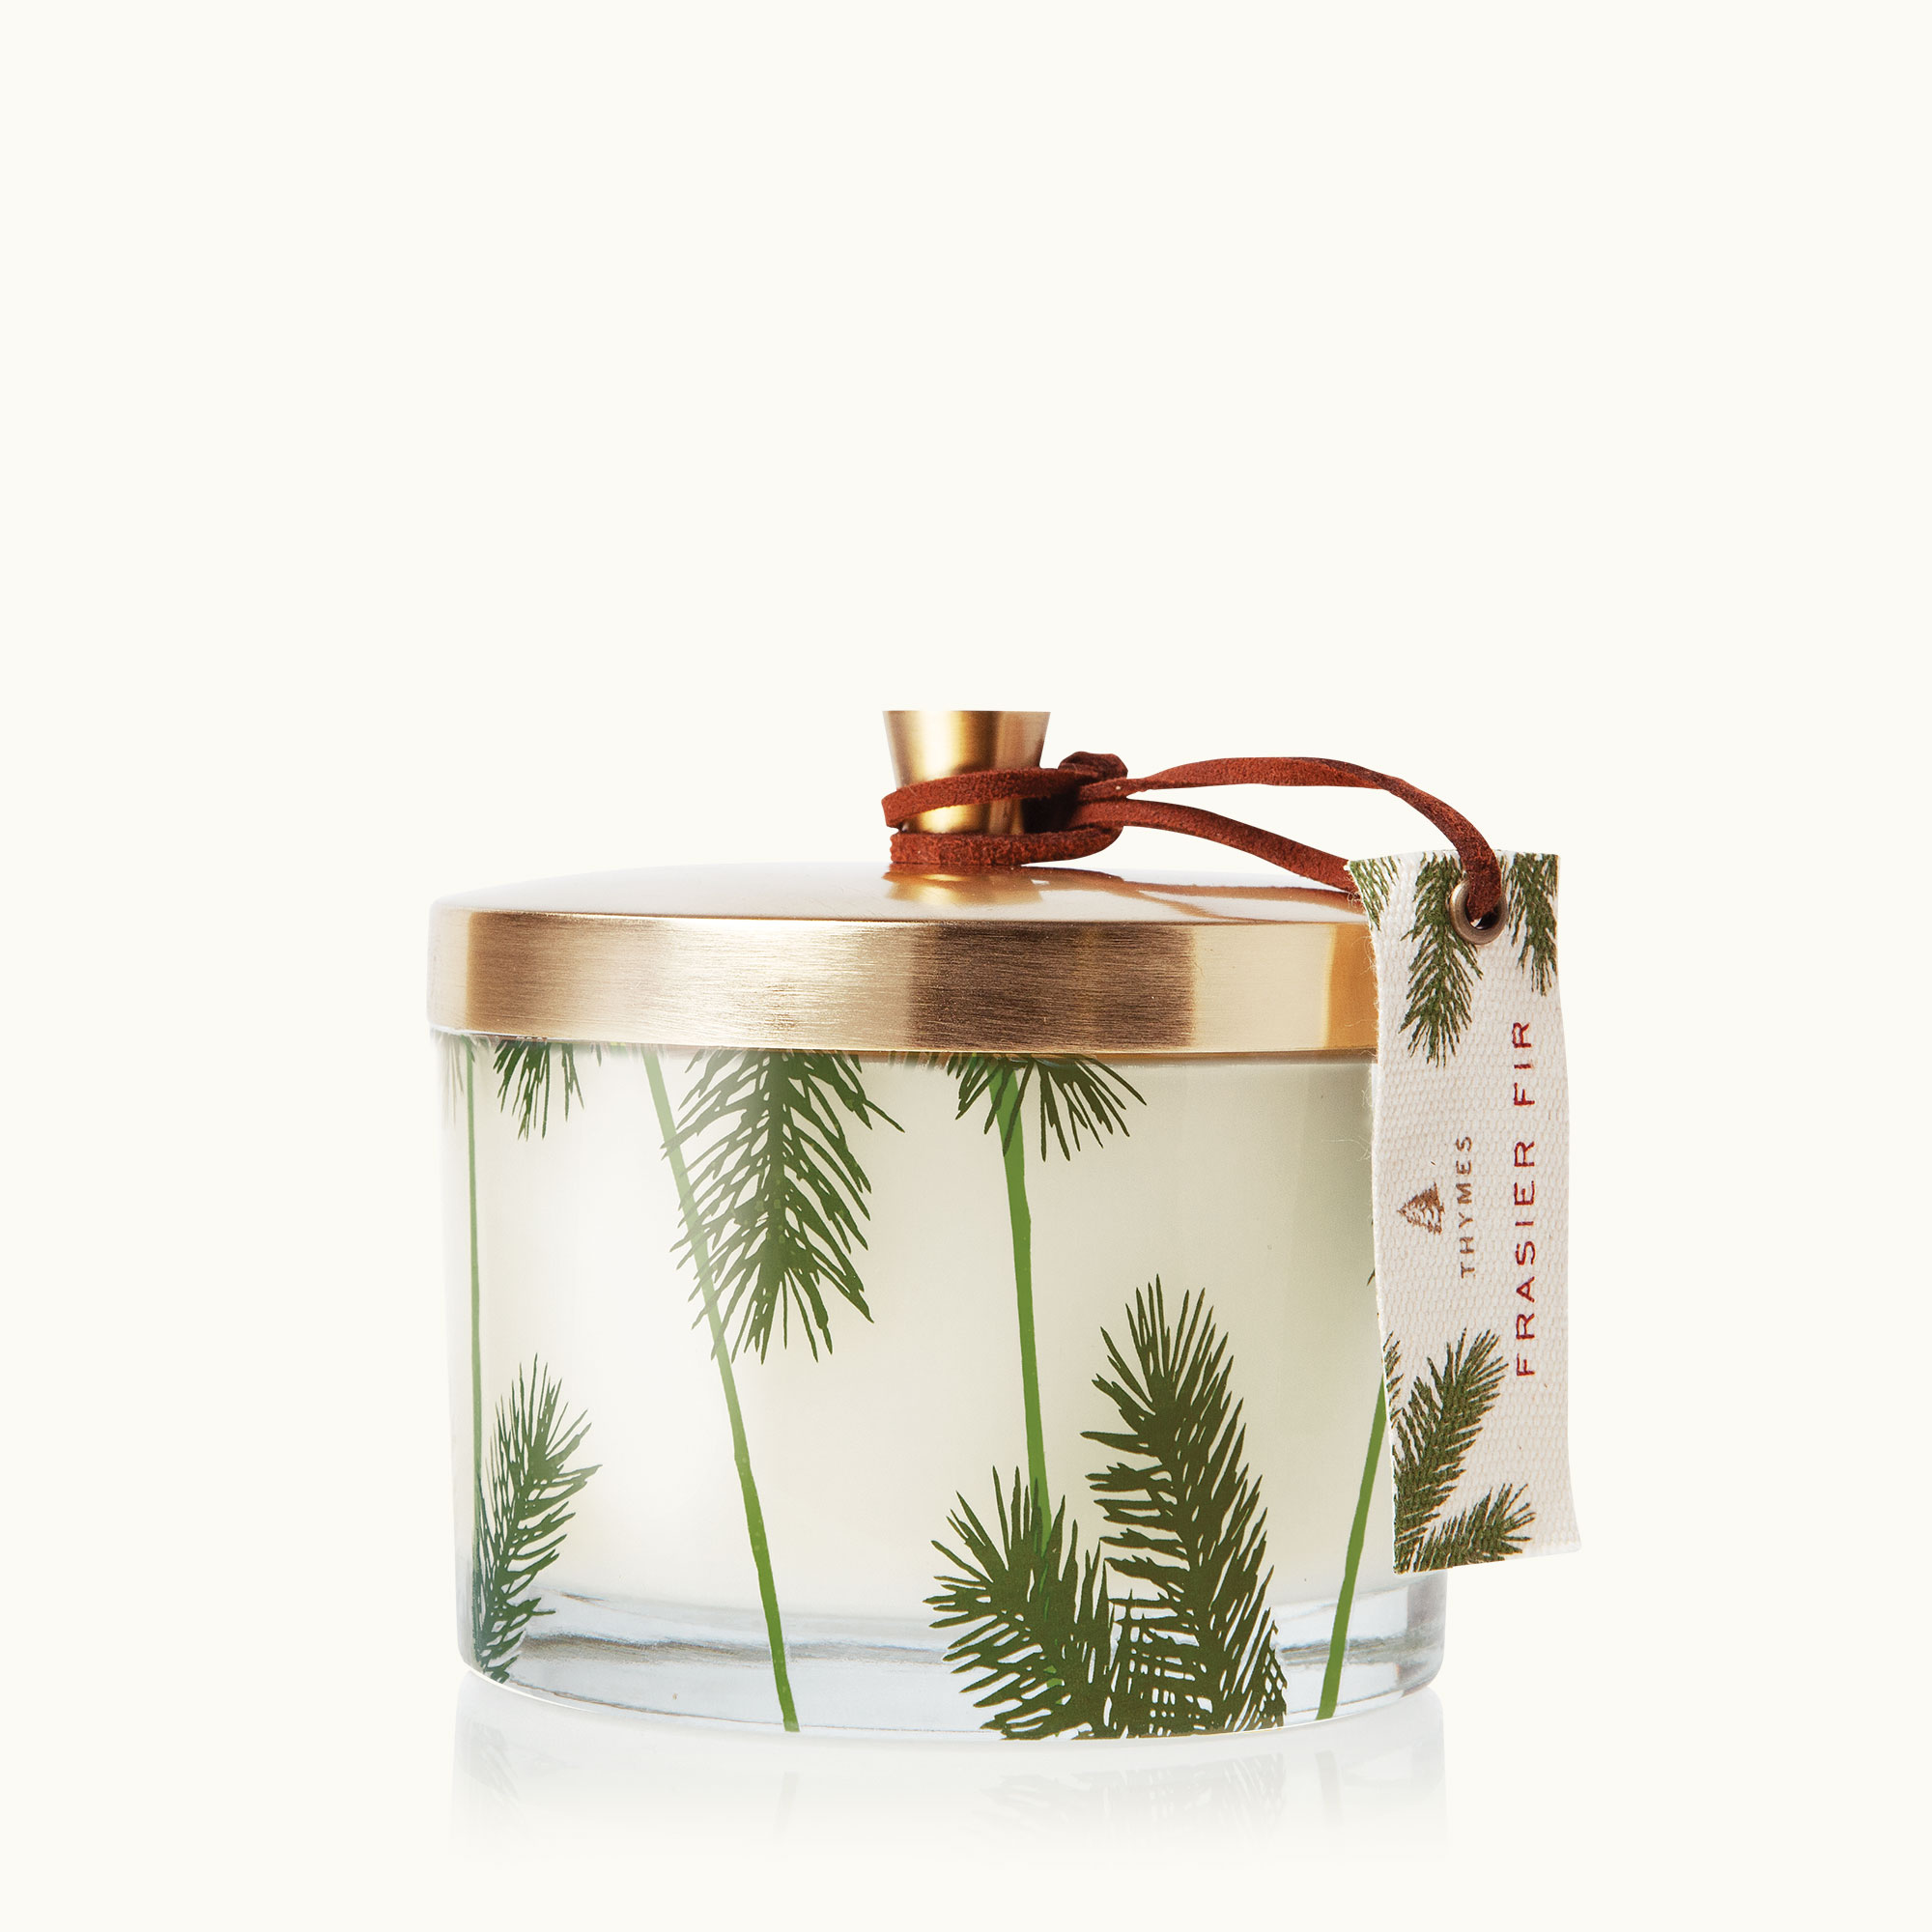 Frasier Fir Statement Pine Needle Candle — The Horseshoe Crab